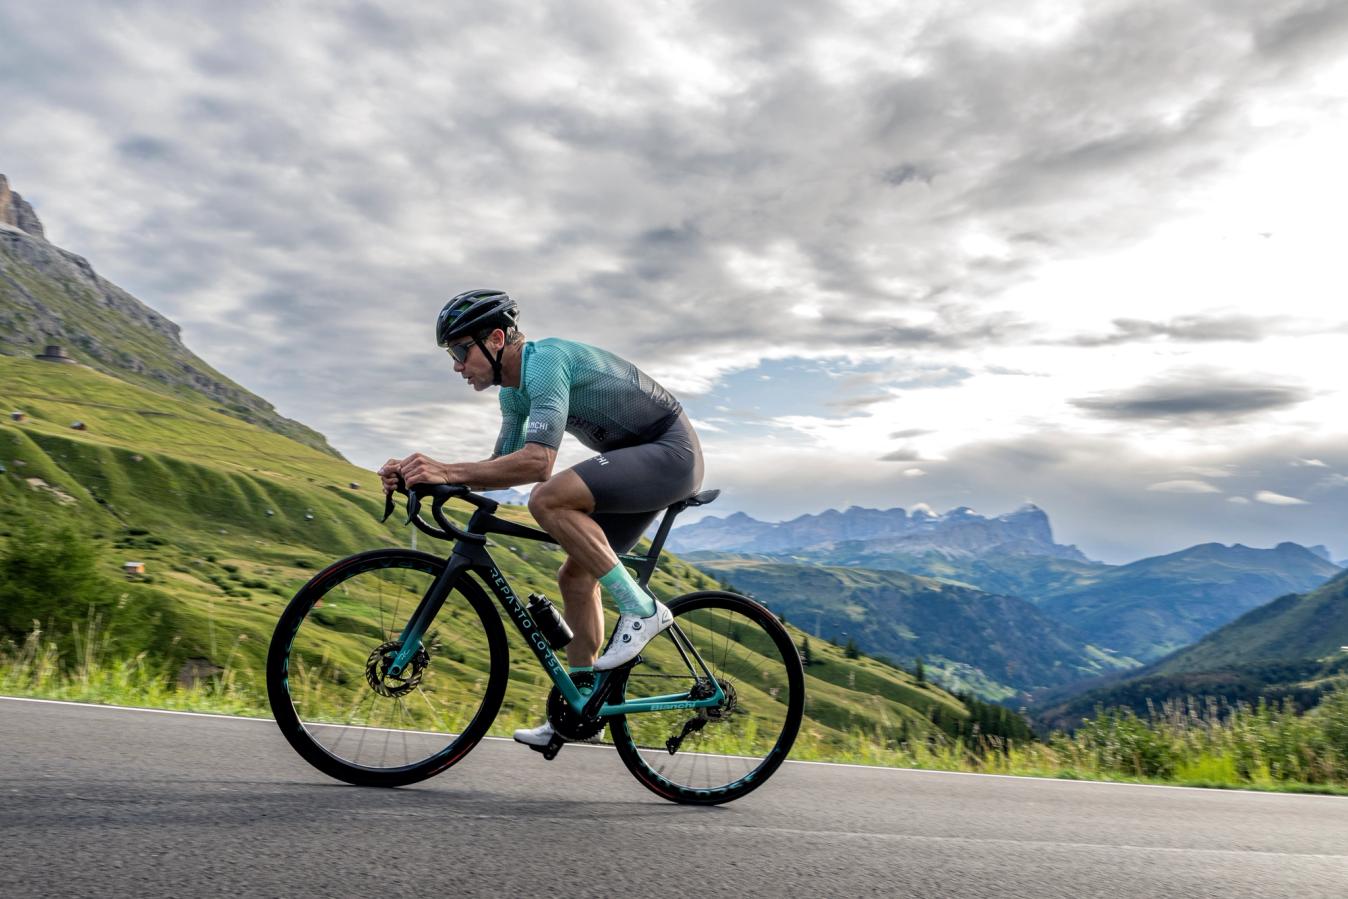 The Bianchi Specialissima is built for the climbs